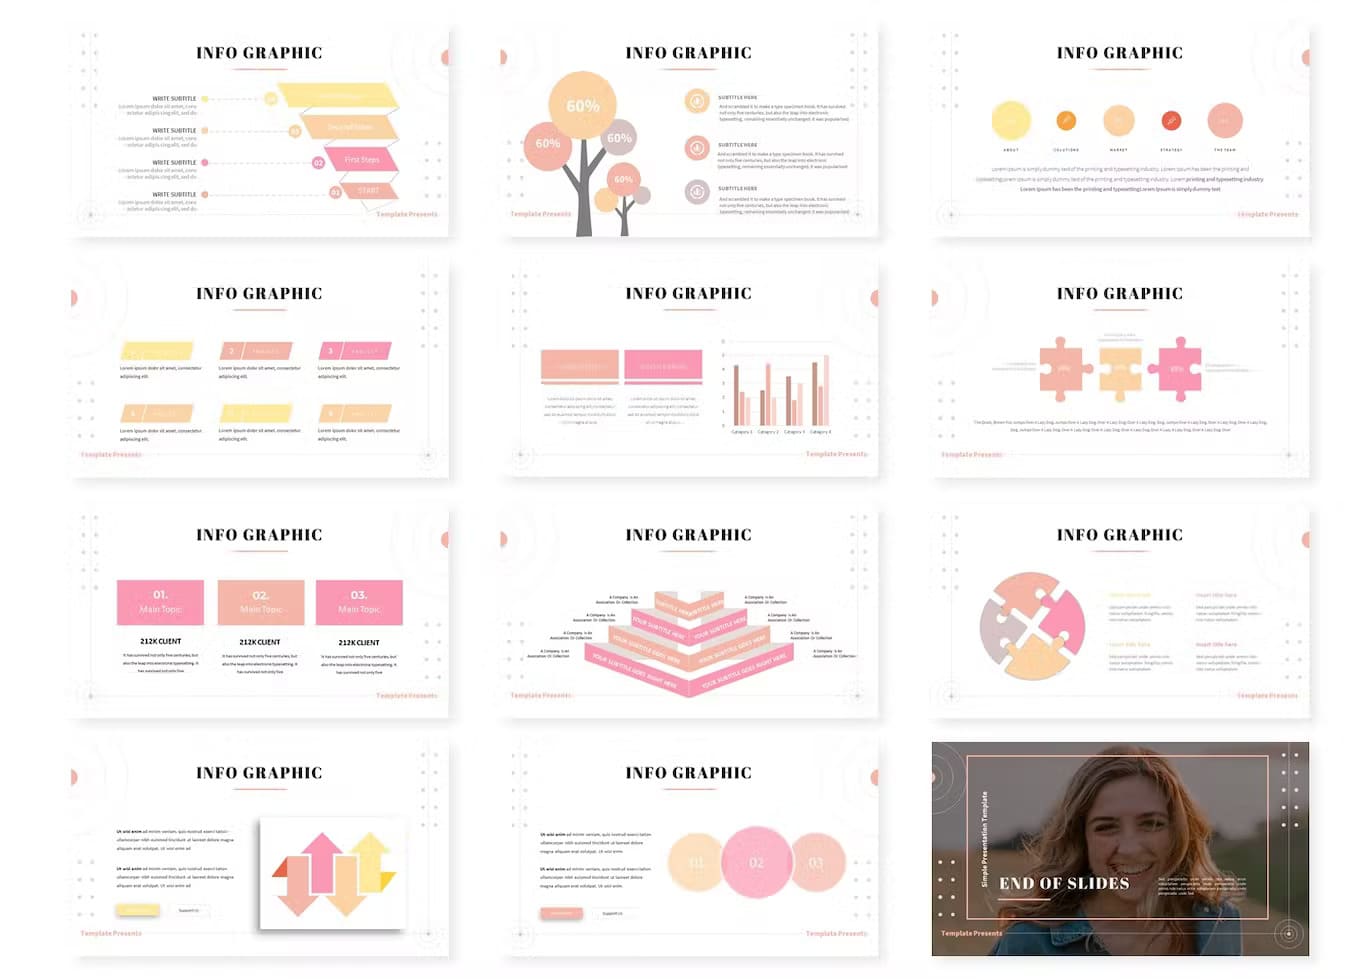 Infographic of the Pretty Model | Powerpoint Template.